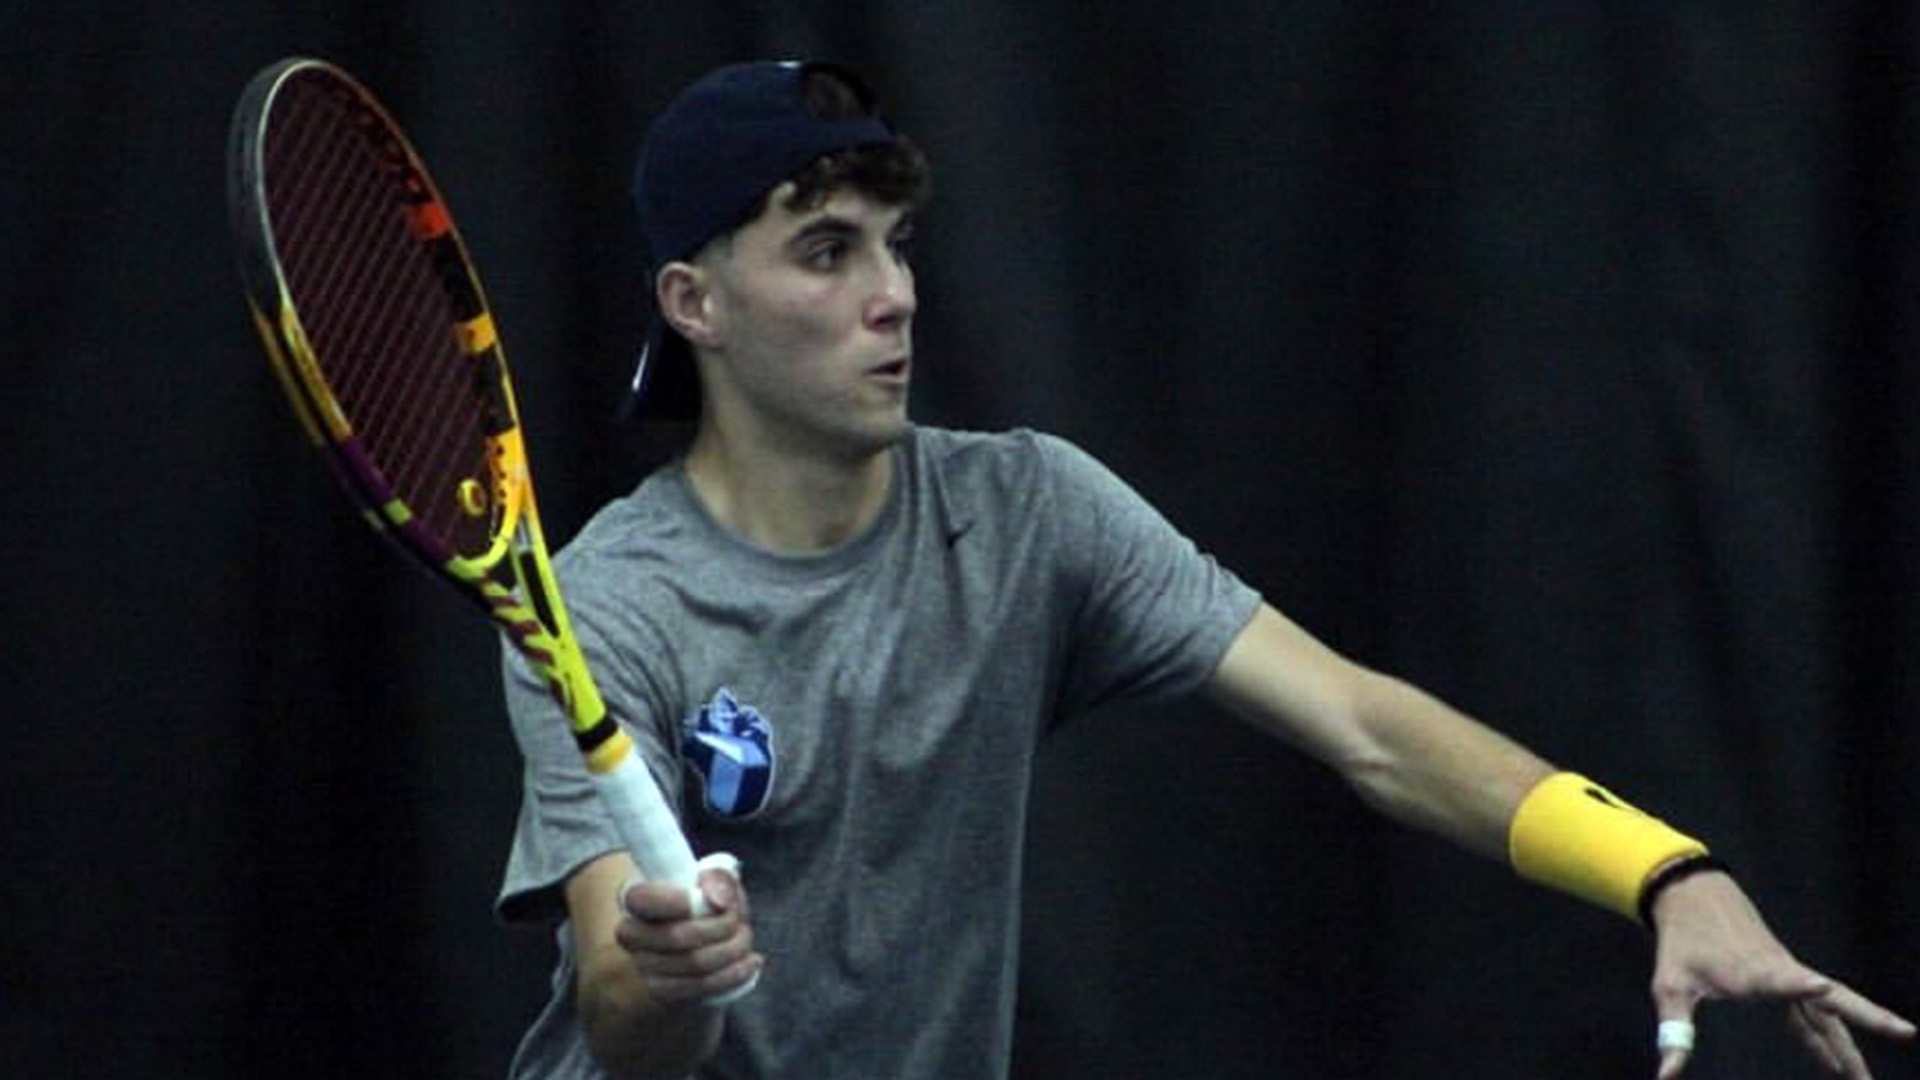 Salmeron picked for RSC Men's Tennis Player of the Week